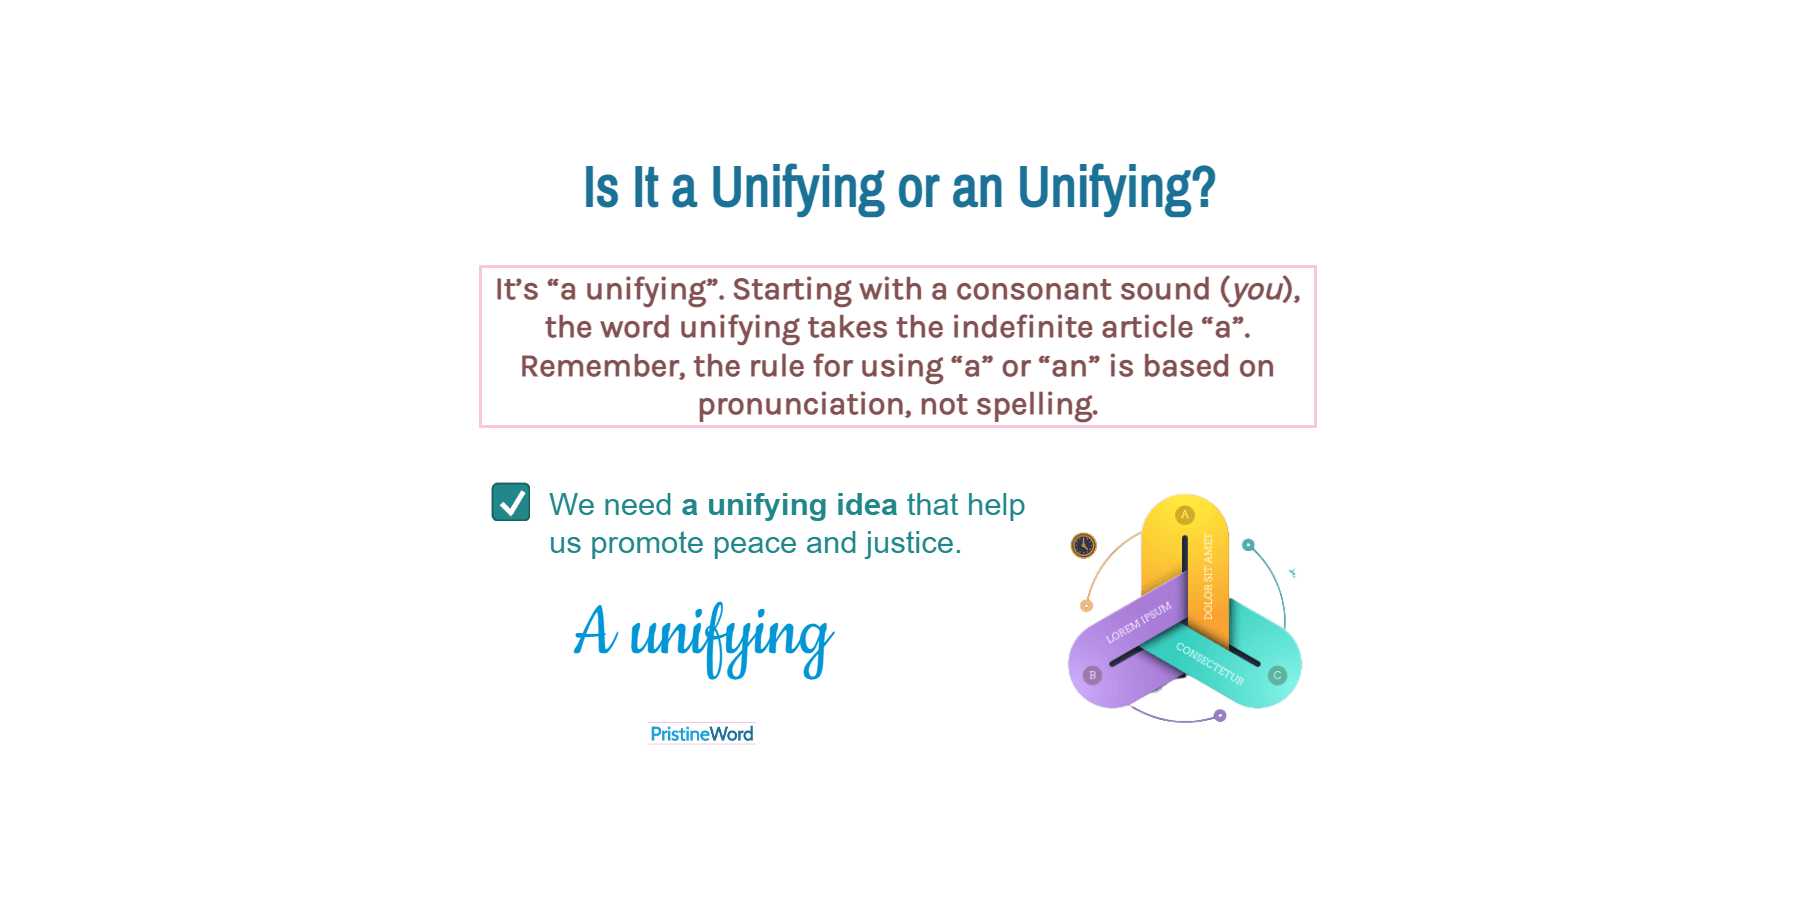 Is It a Unifying or an Unifying?